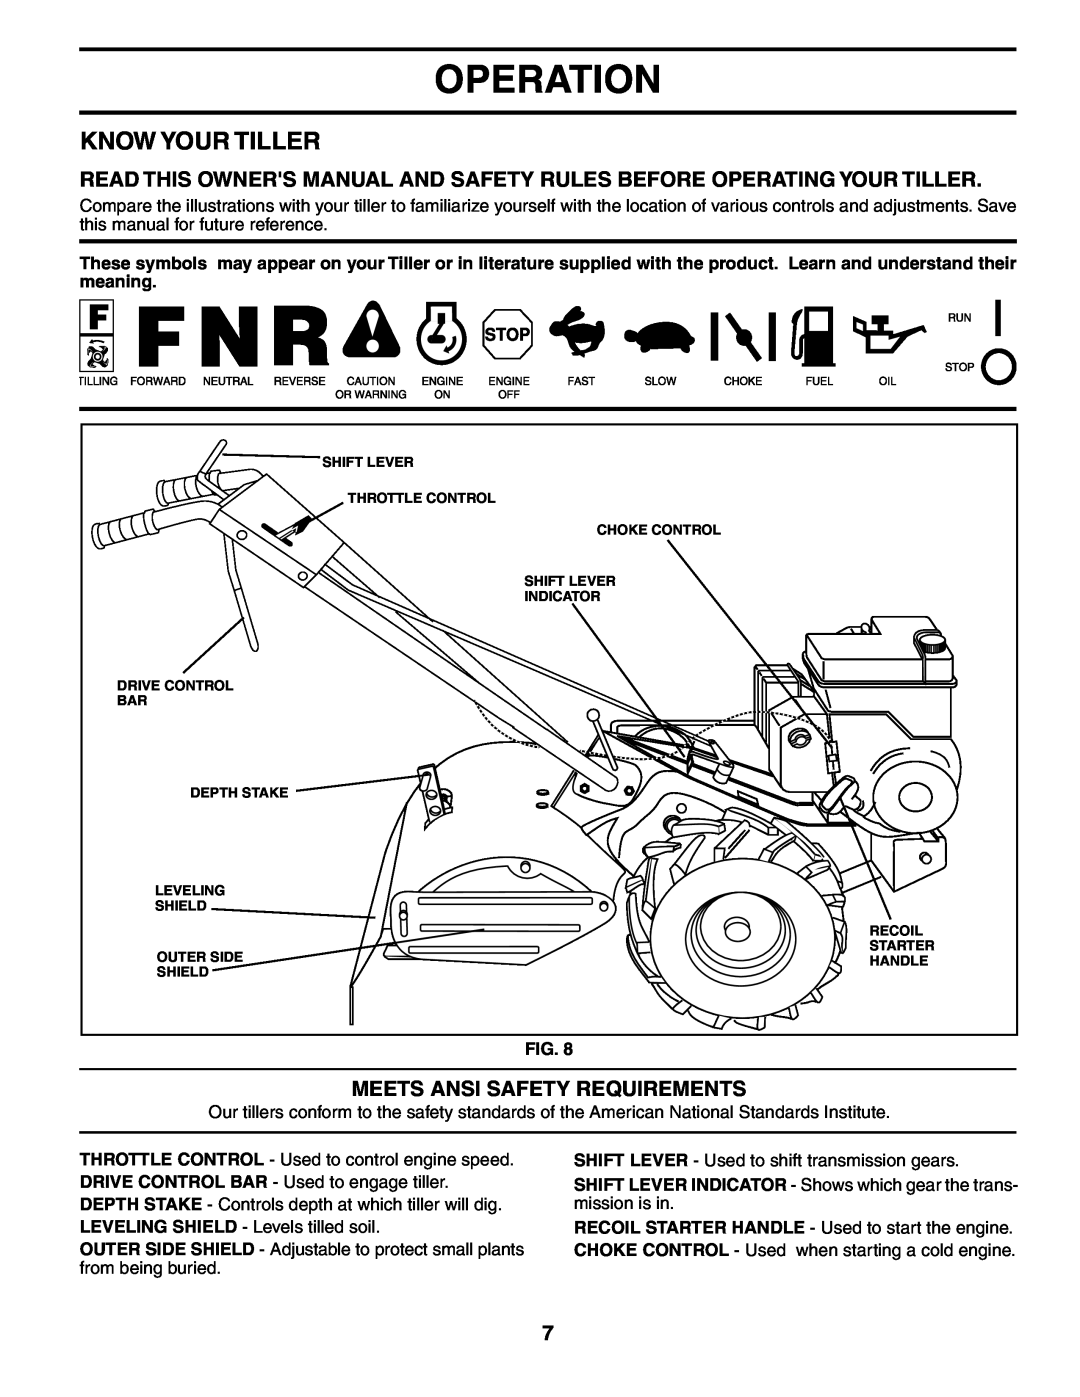 Weed Eater 186100 owner manual Operation, Know Your Tiller, Meets Ansi Safety Requirements 